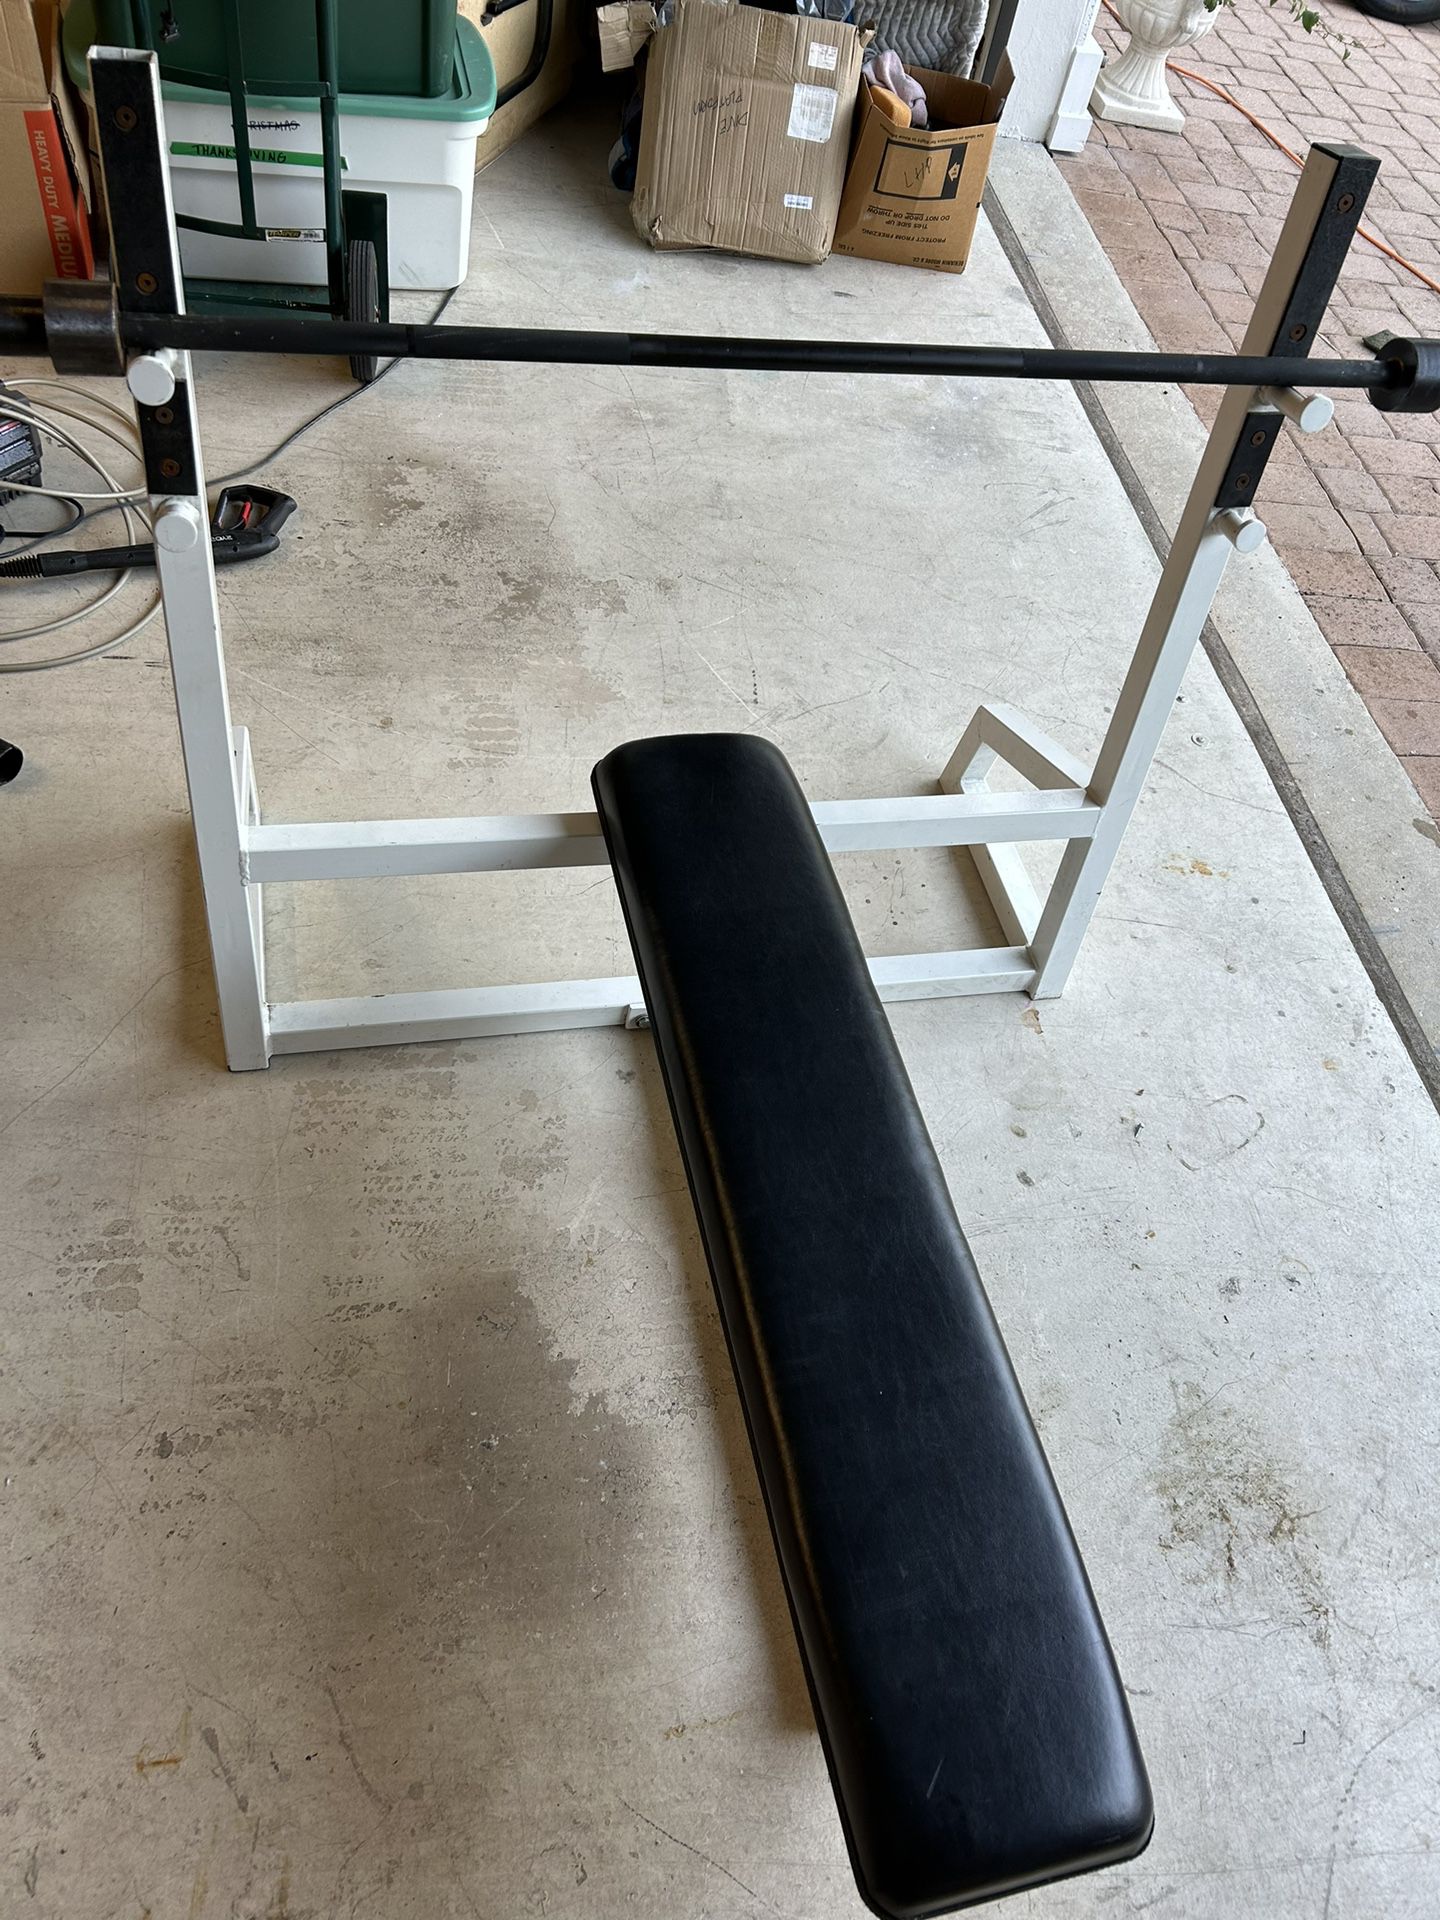 Need Gone Today! Weight Bench Commercial 